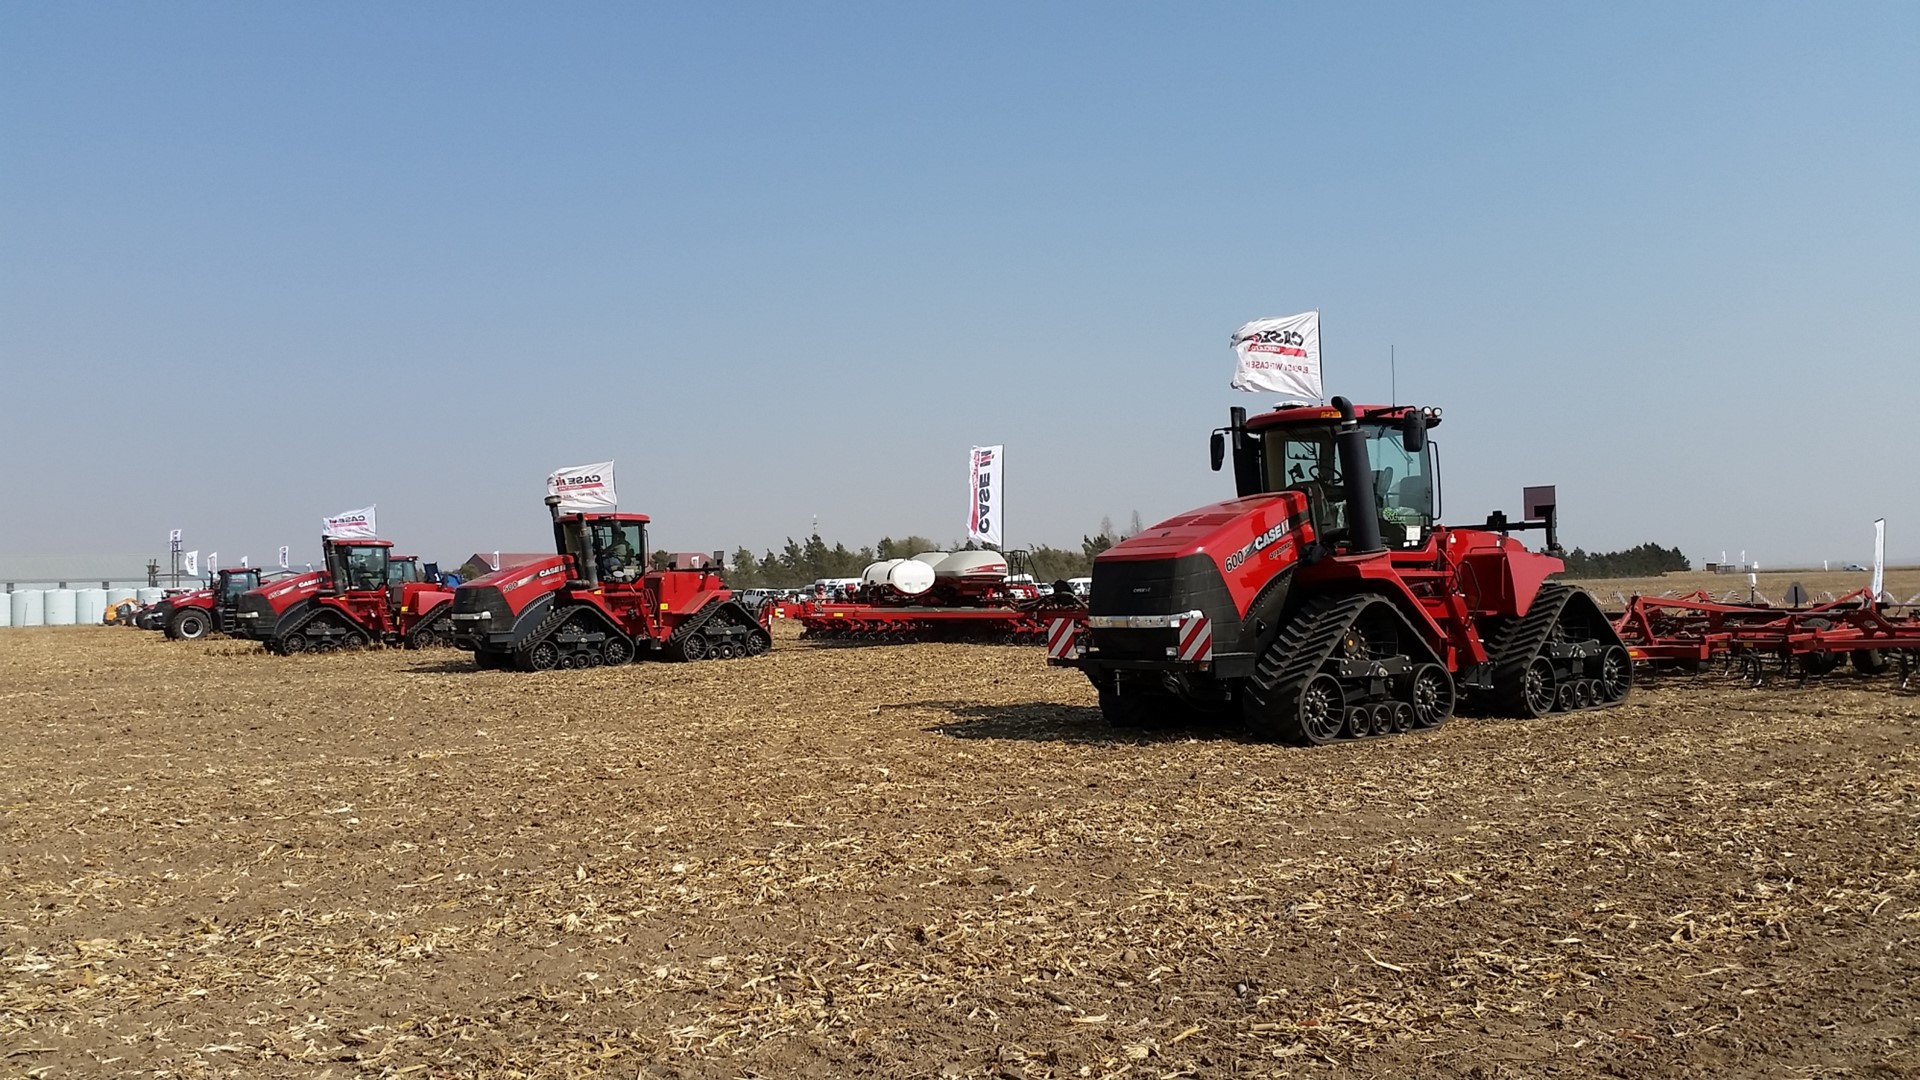 Case IH Annual Farmers Day in South Africa, displays its product range